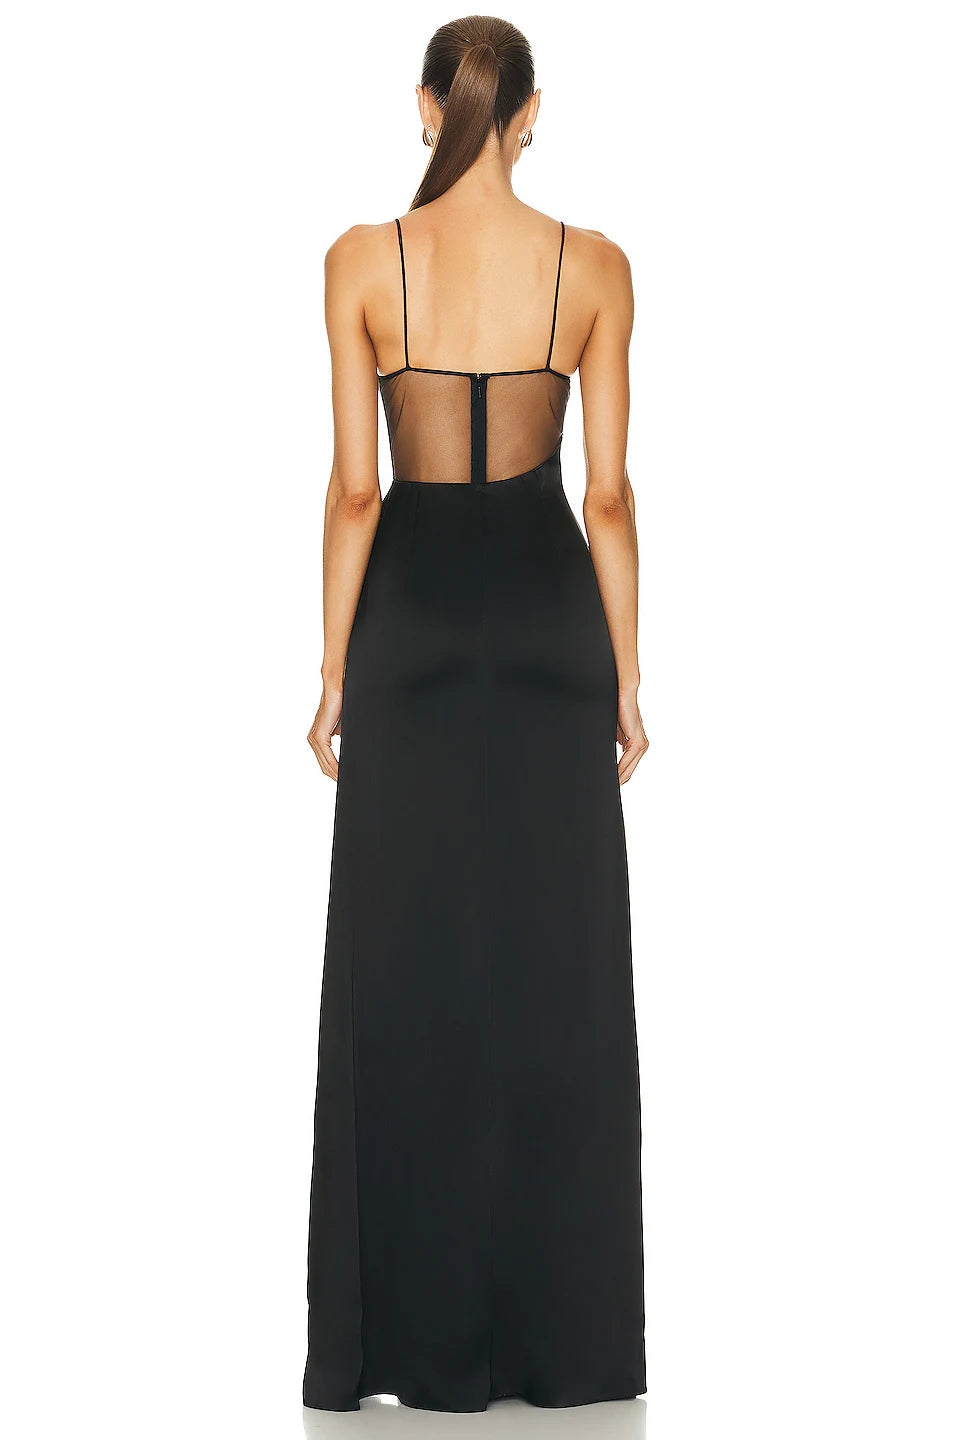 A&A Luxe Starfish Embellished Mesh Black High Split Maxi Dress